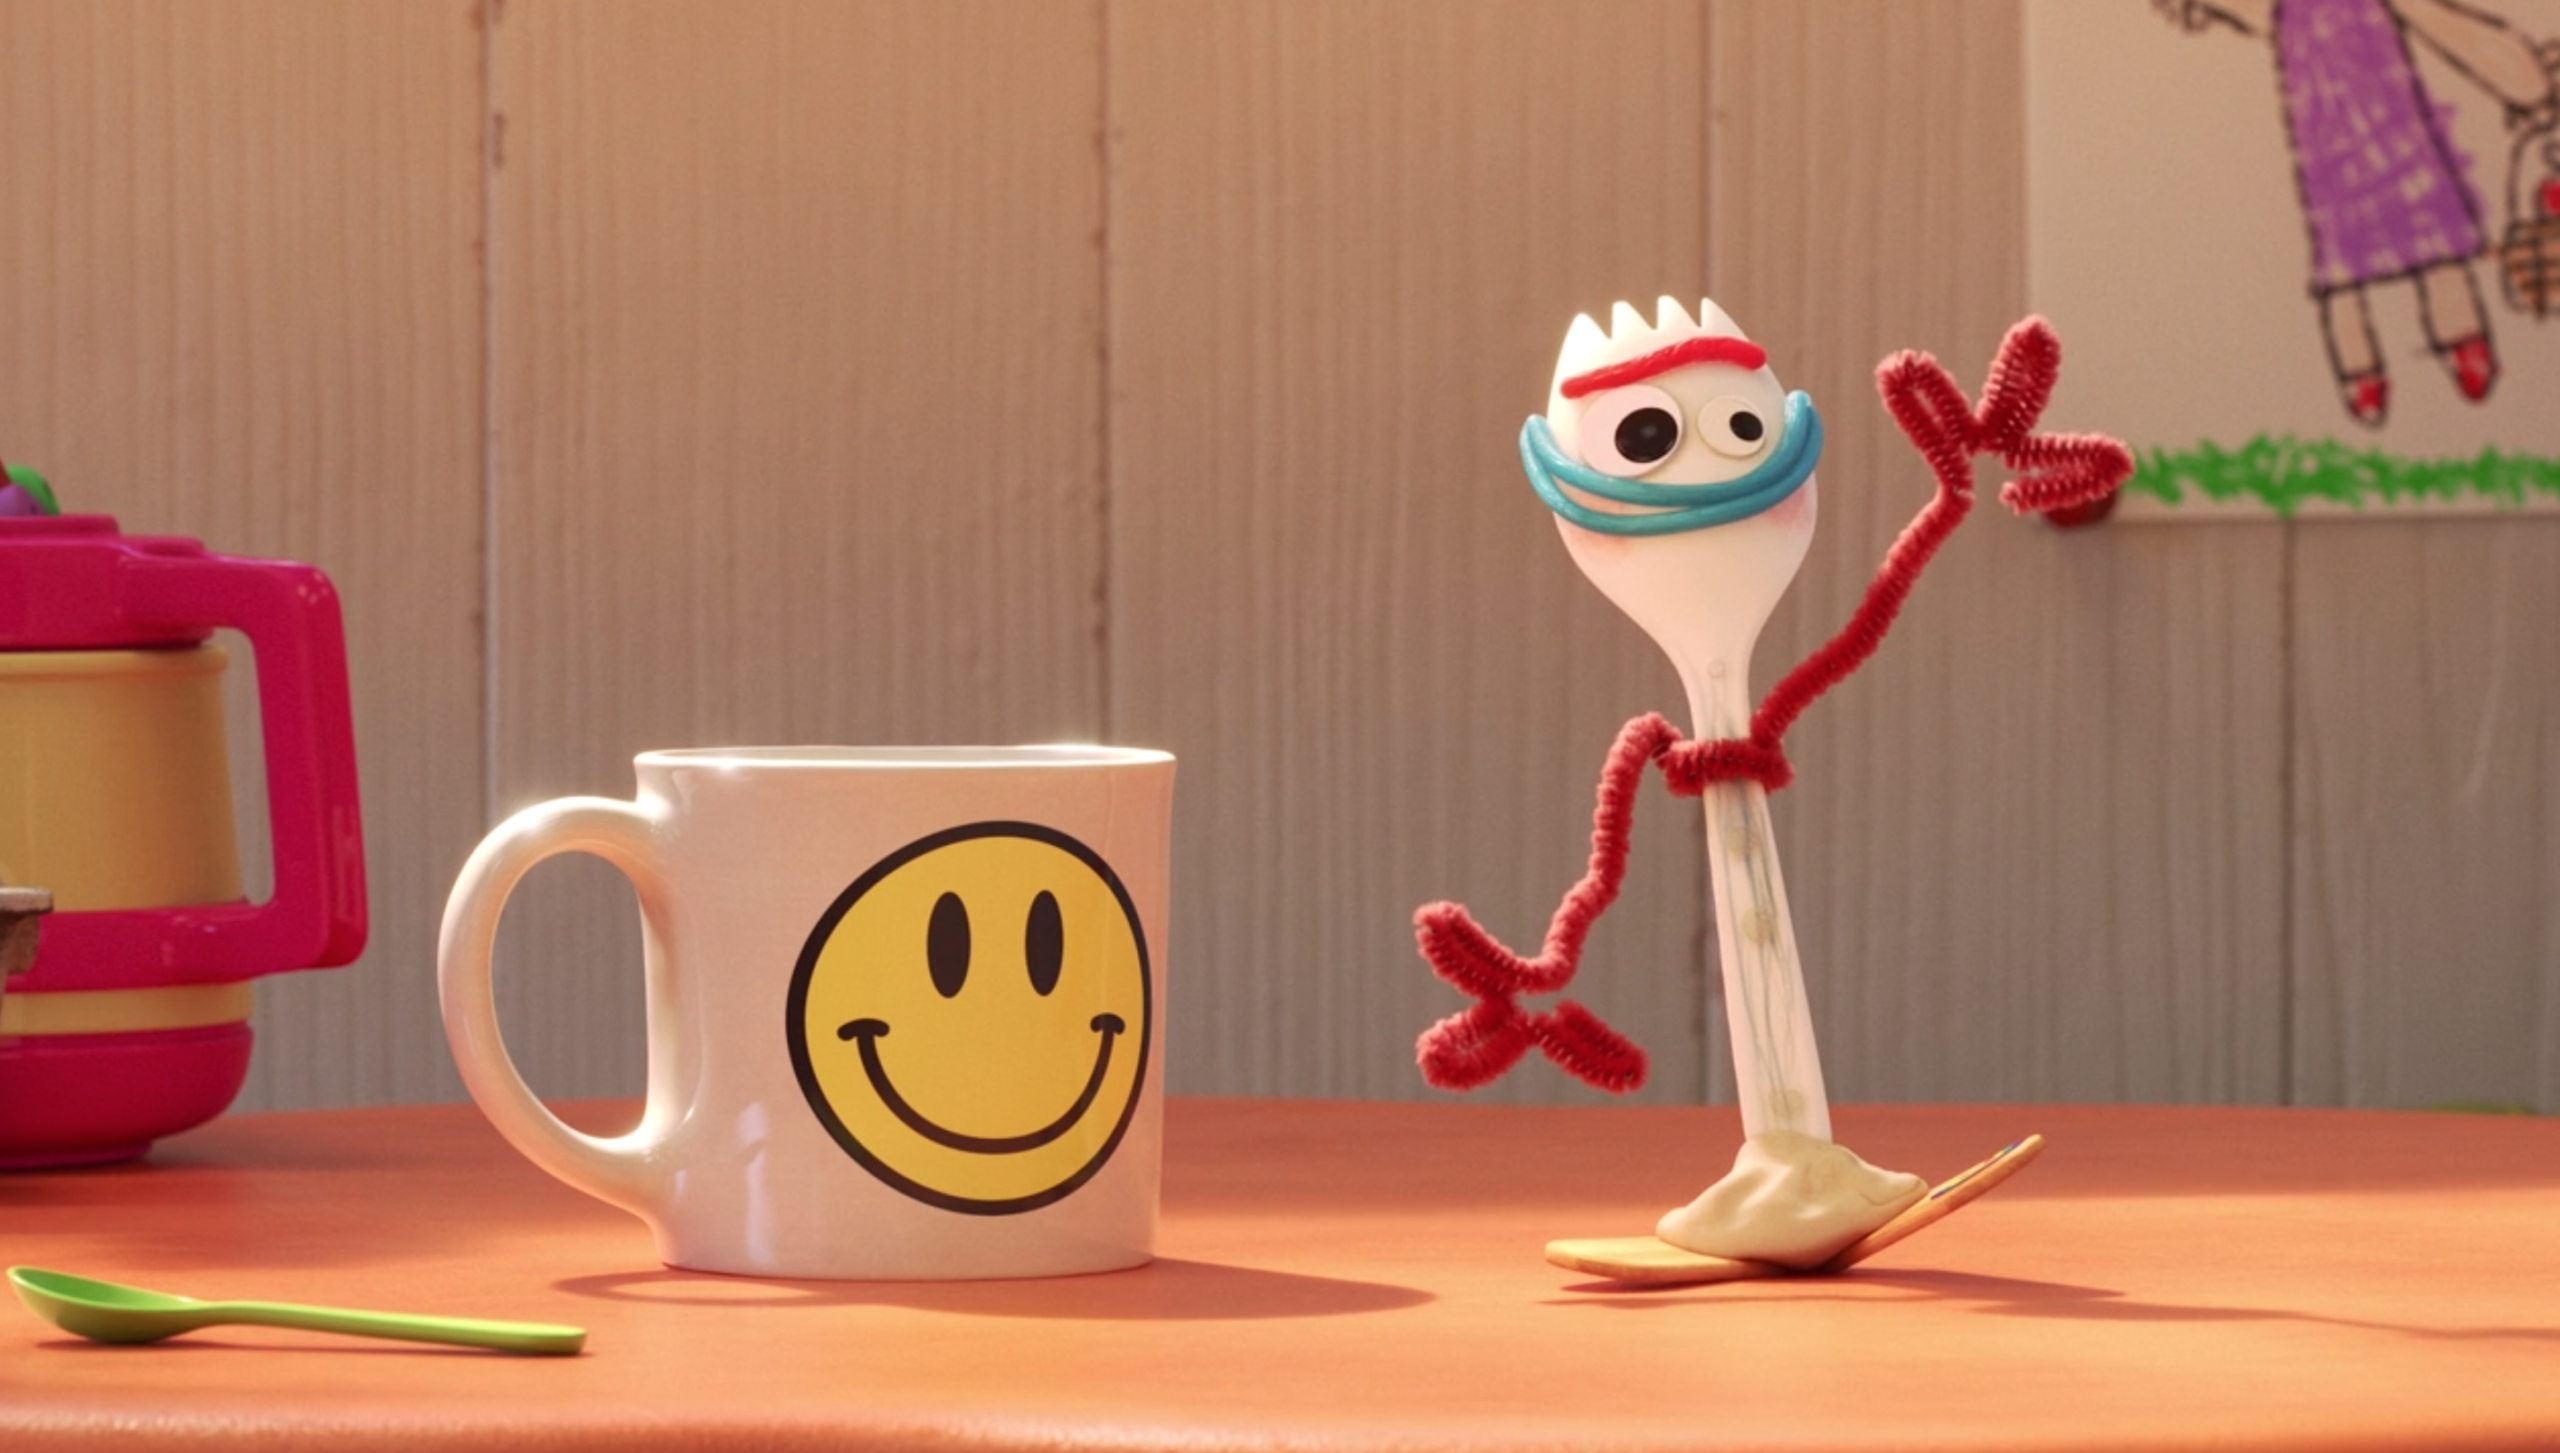 Watch Forky Asks A Question